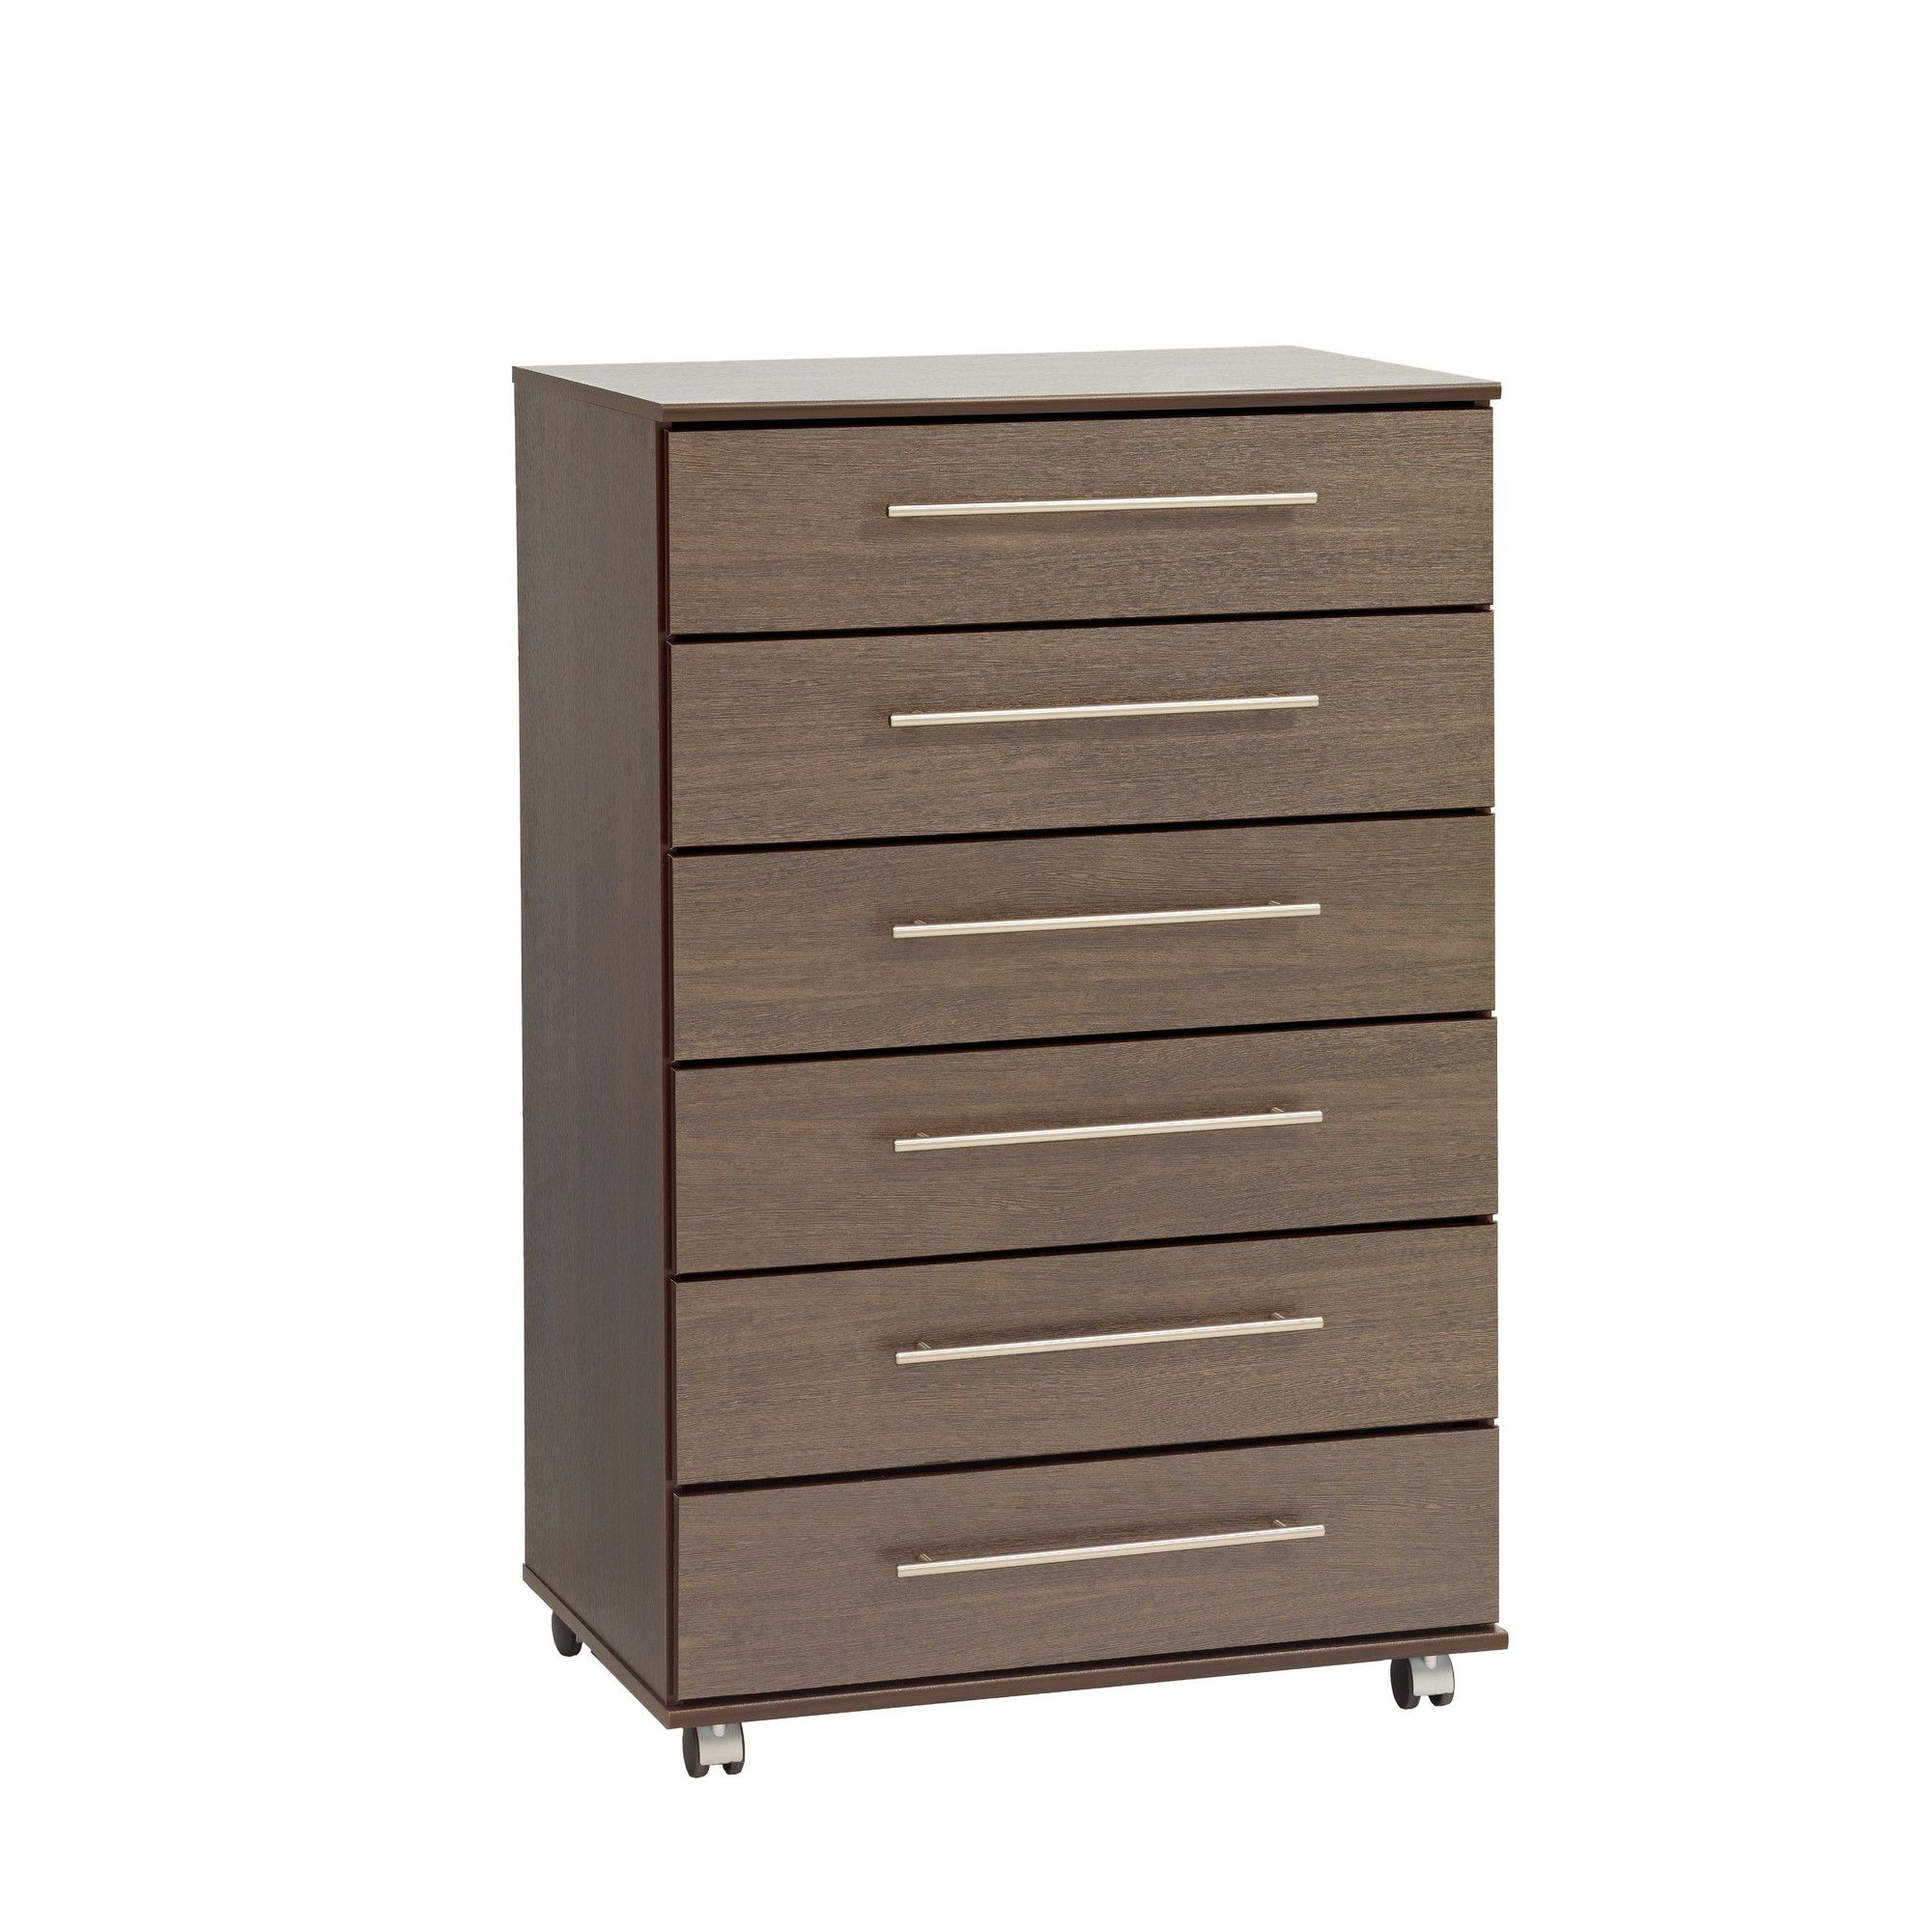 Ideal Furniture New York 6 Drawer chest - Oak at Tesco Direct